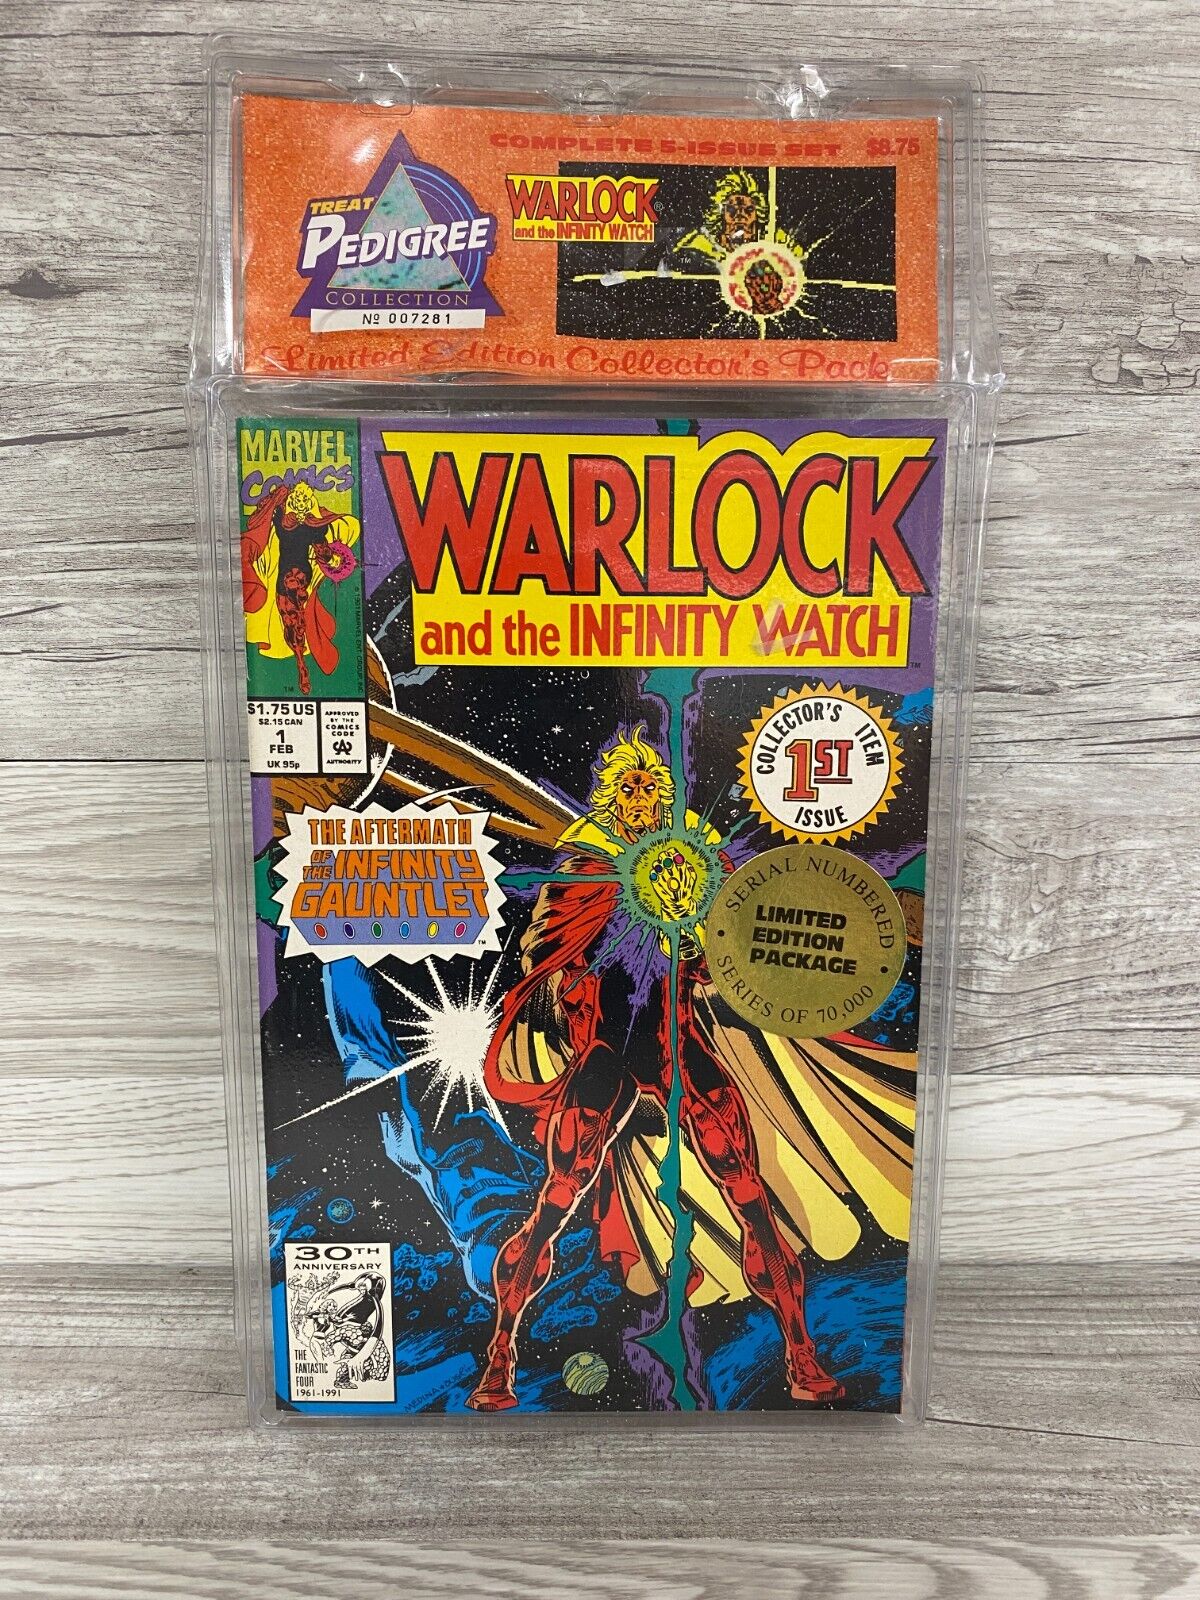 Warlock and the Infinity Watch #1 Marvel, February 1992 Comic Book